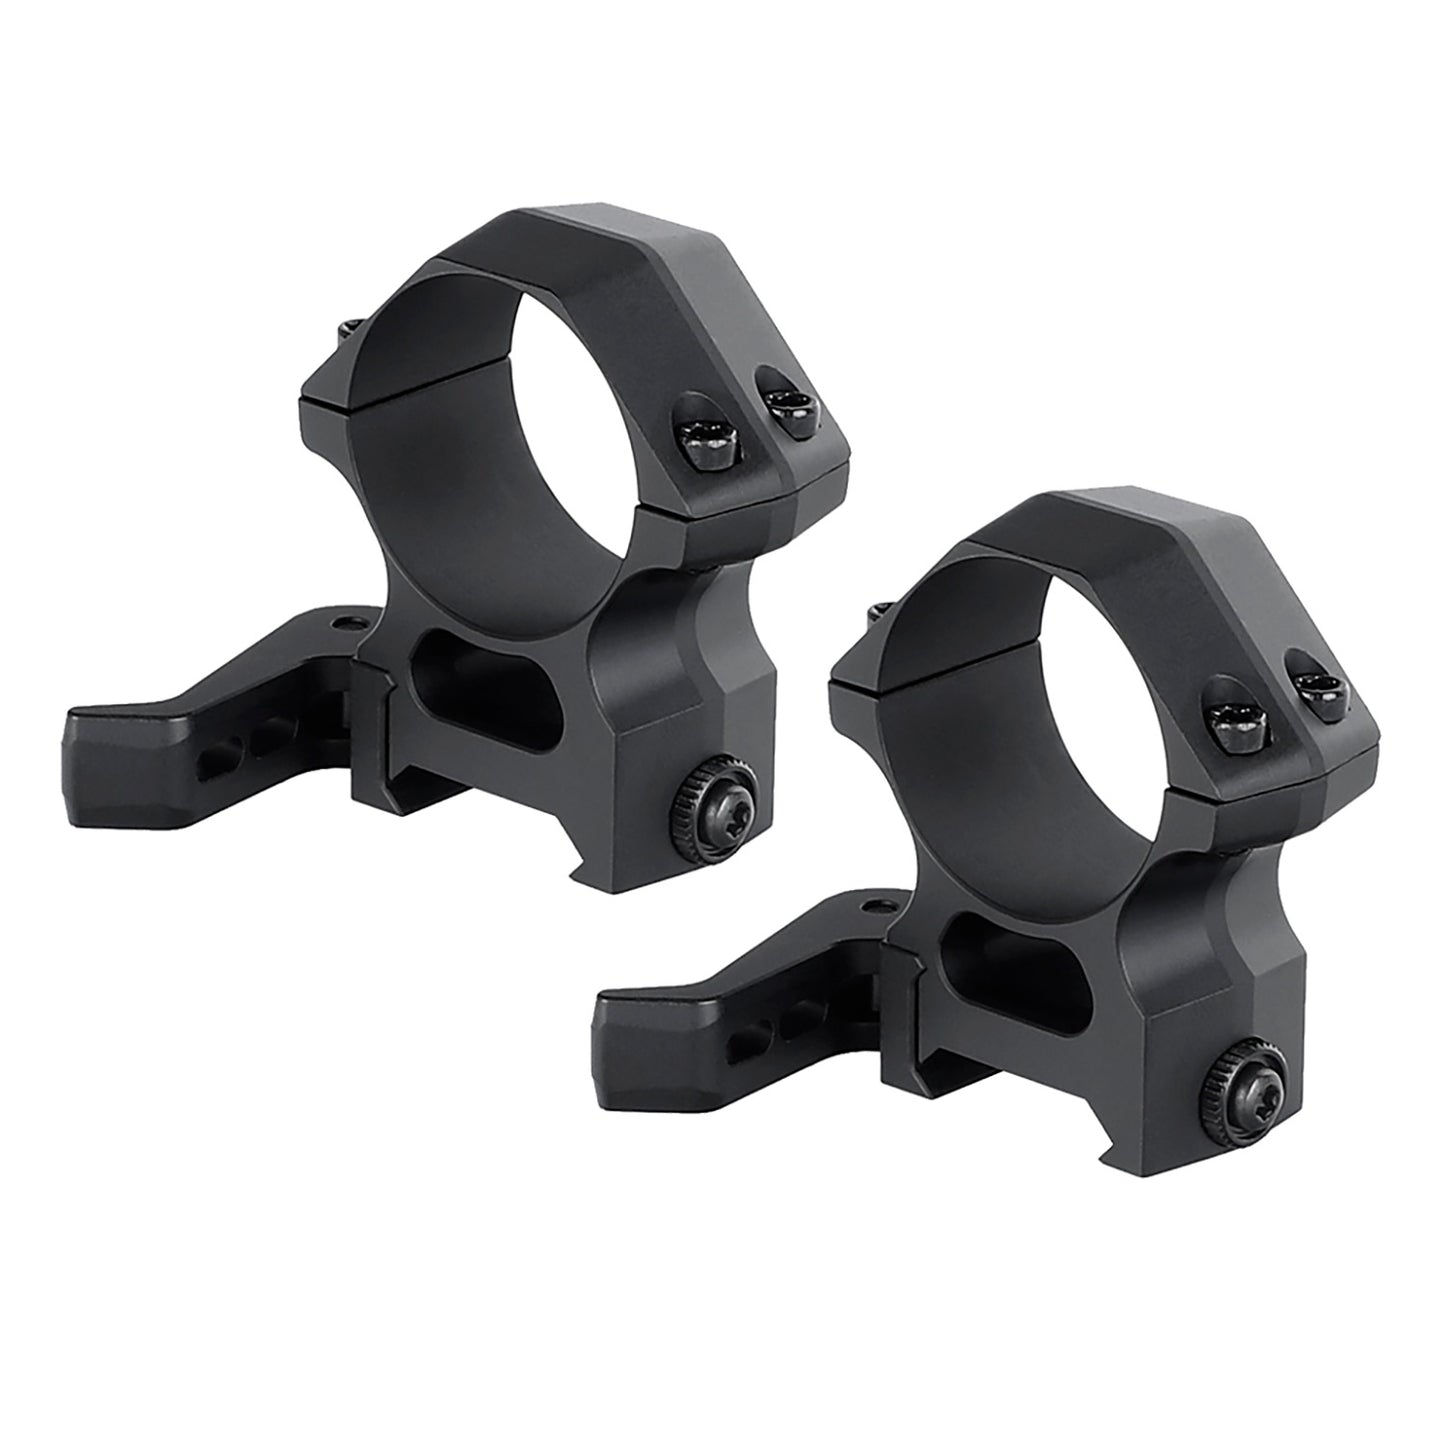 ohhunt® Pro Quick Release 30mm Scope Rings Mount Picatinny Rail 7075-T6 Aluminum - High Profile